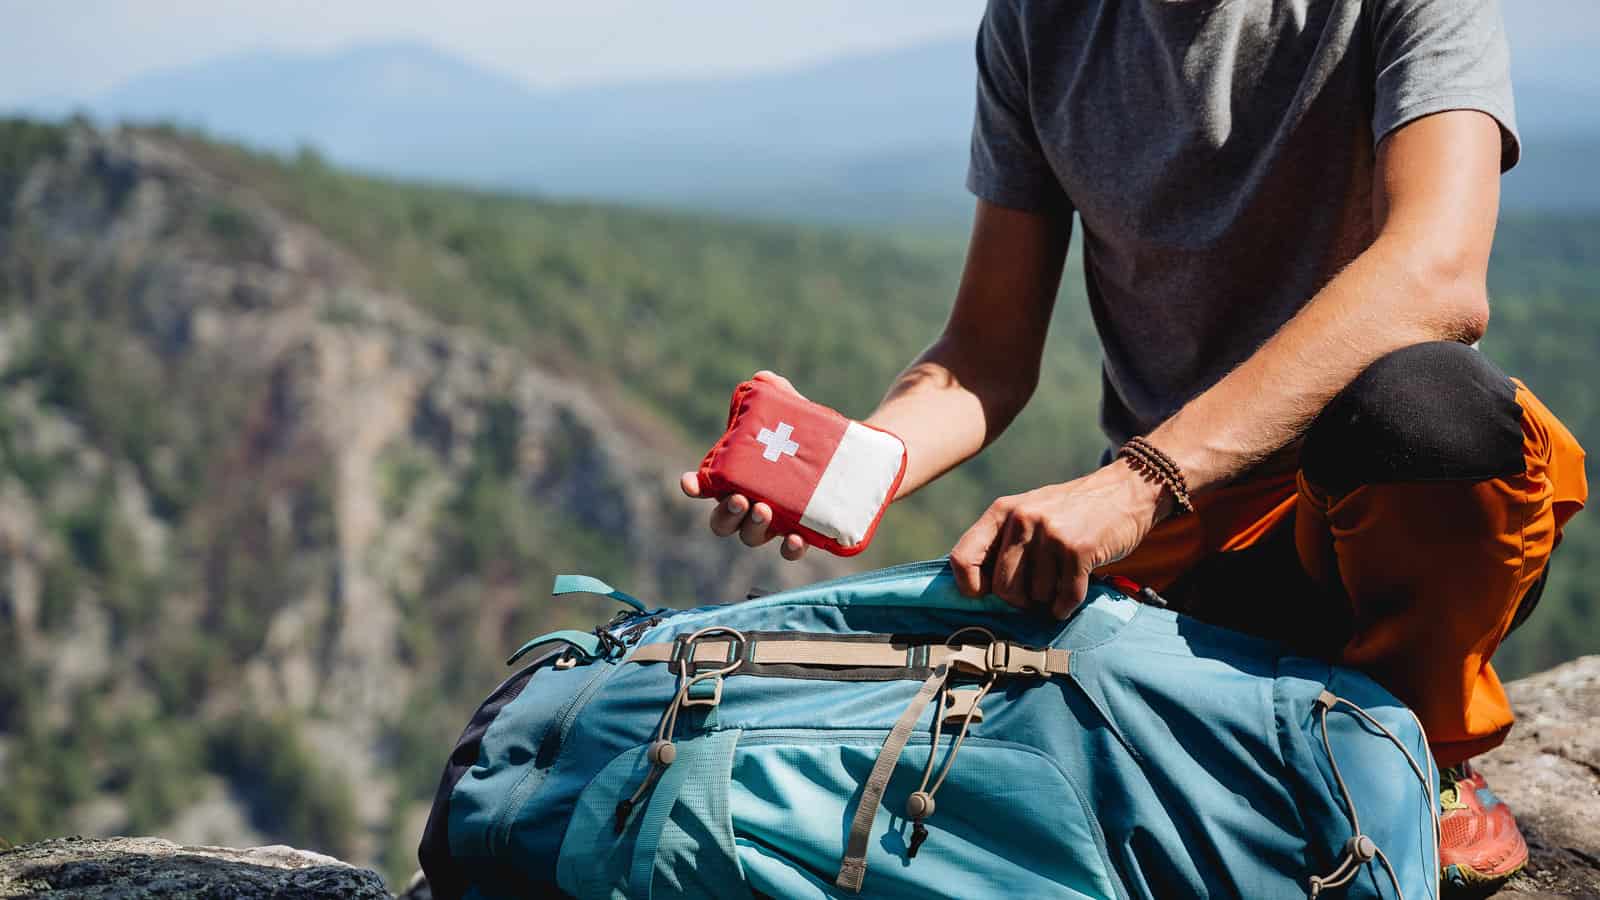 Take a first-aid kit in a backpack on a trip, a hand holds a first aid kit against the background of mountains